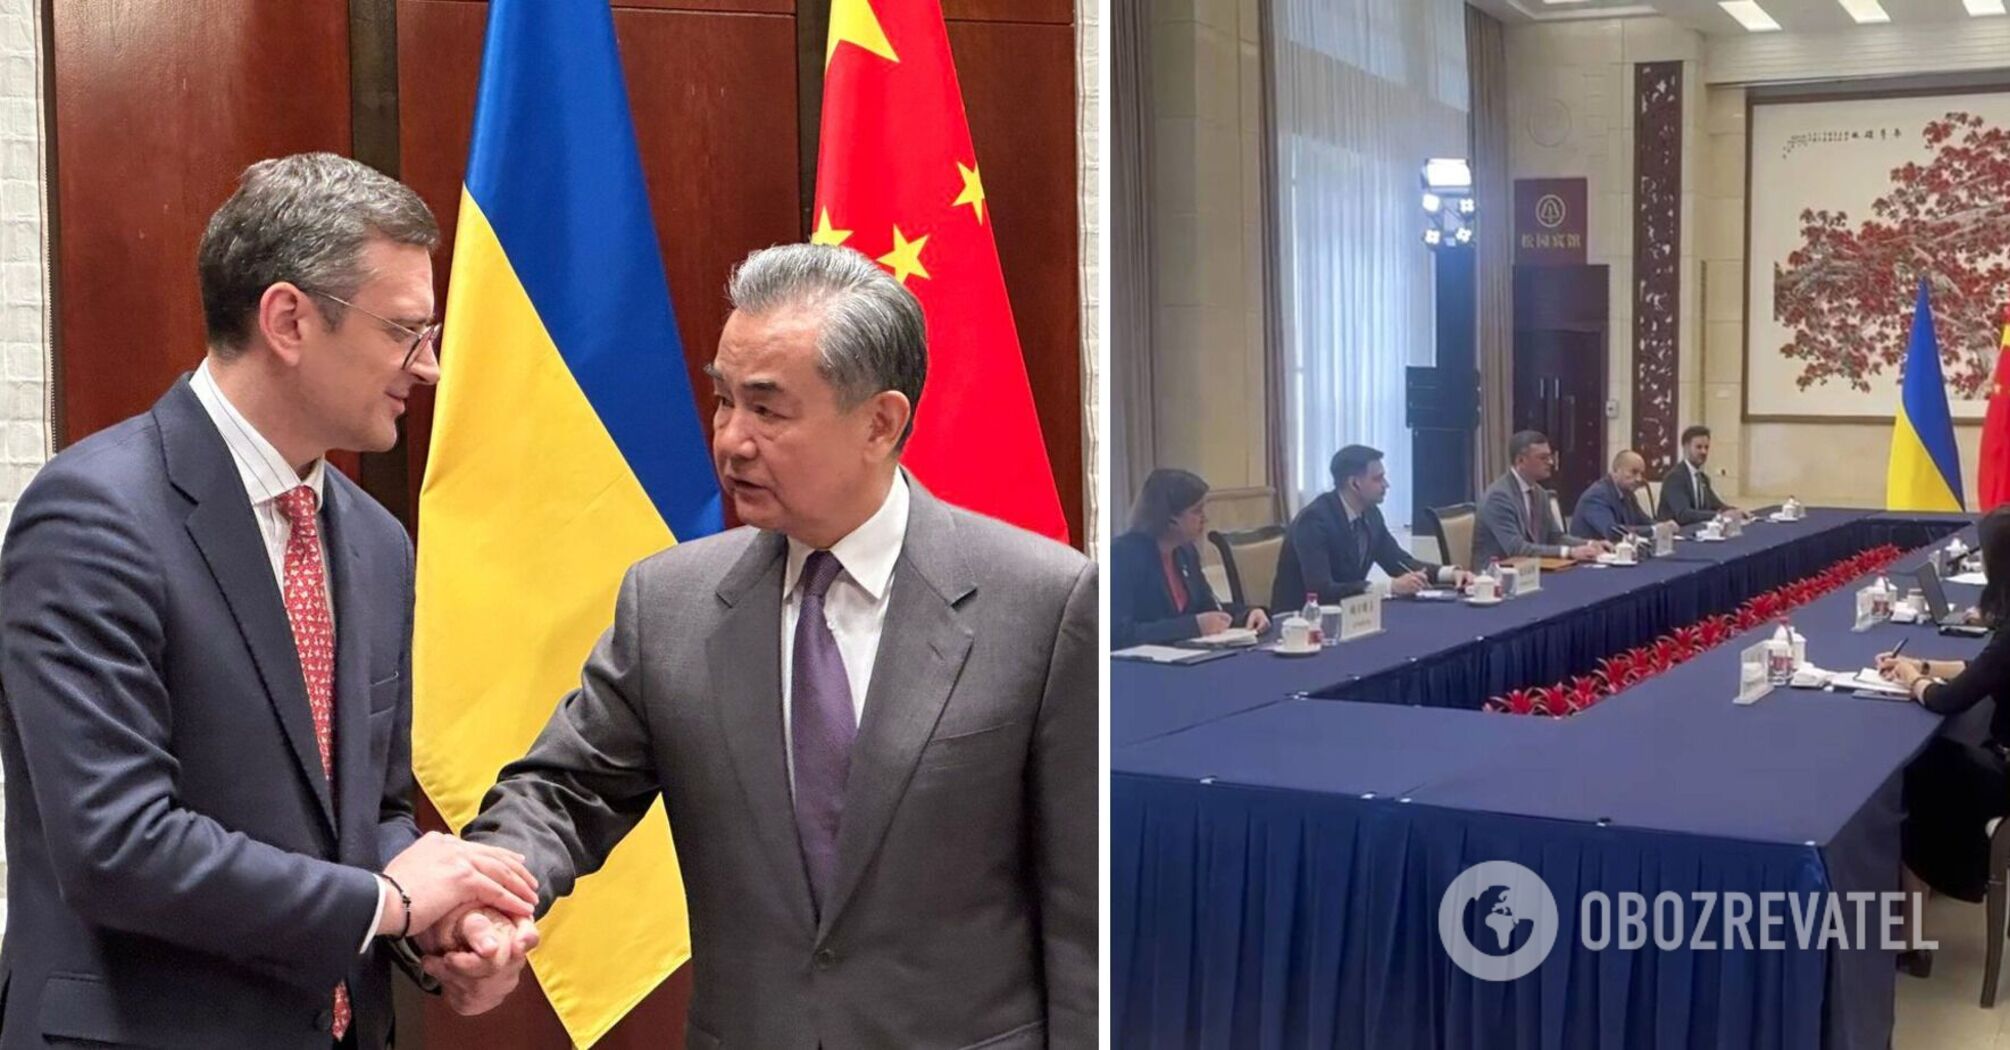 'The most important thing is the path to peace': During his visit to China, Kuleba pointed out the threats to the world due to Russia's aggression